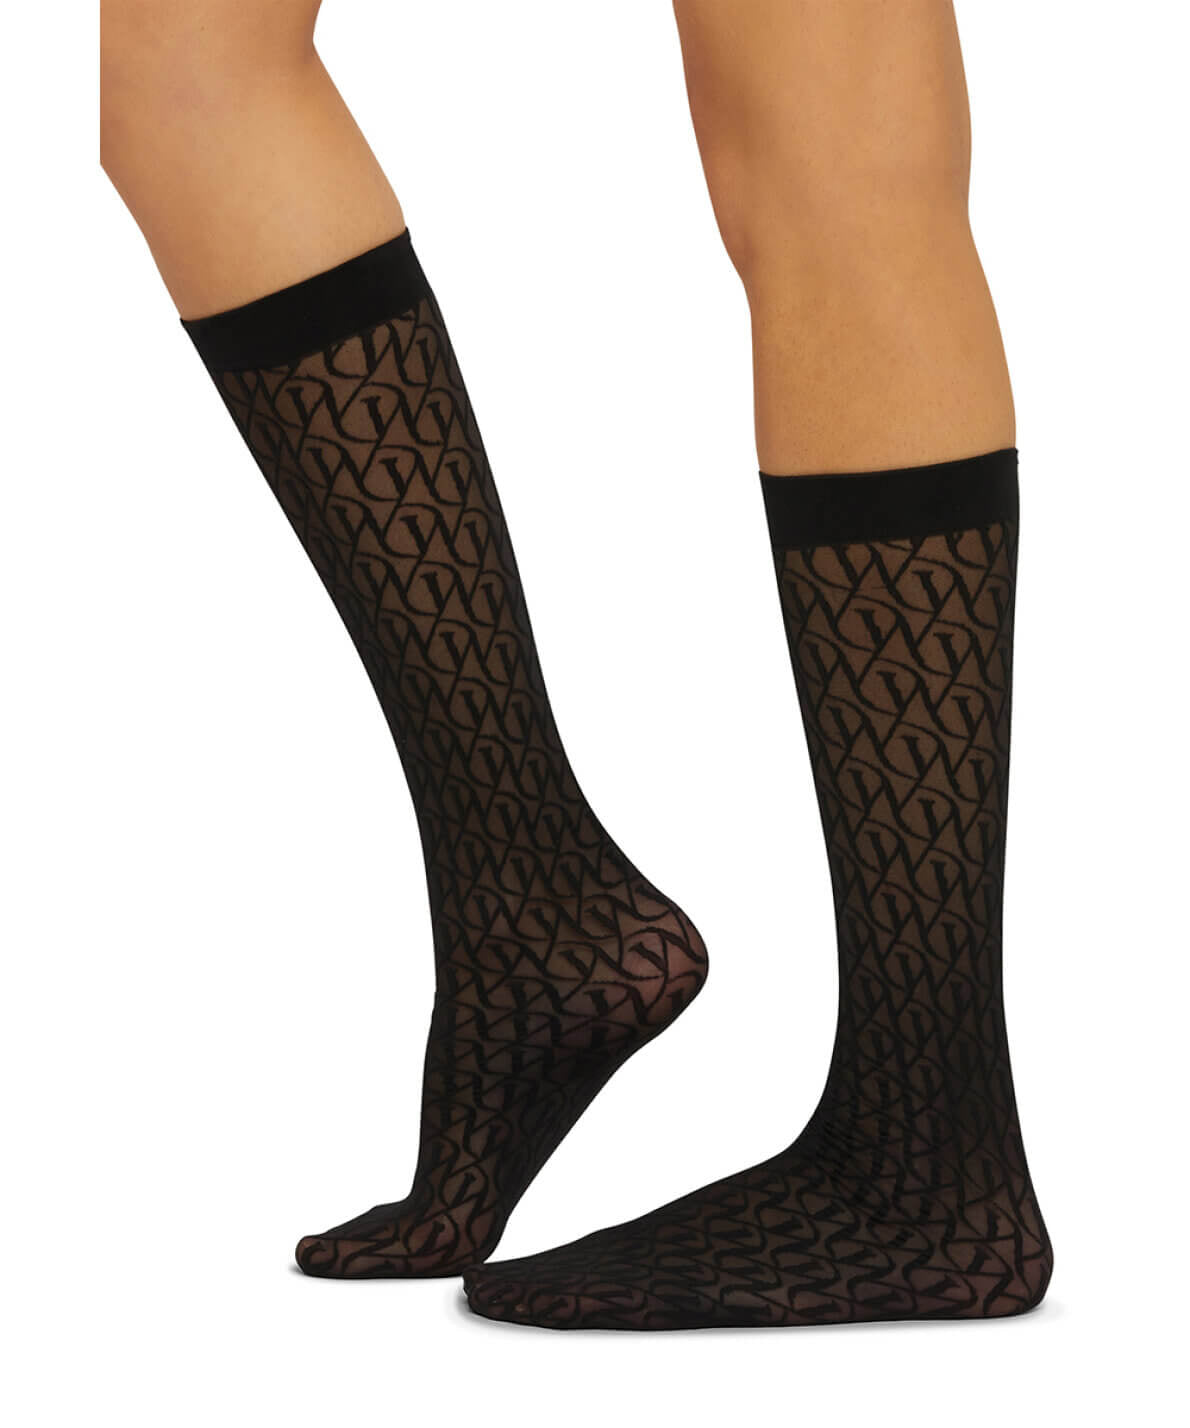 Wolford - Lace Knee-highs Black patterned